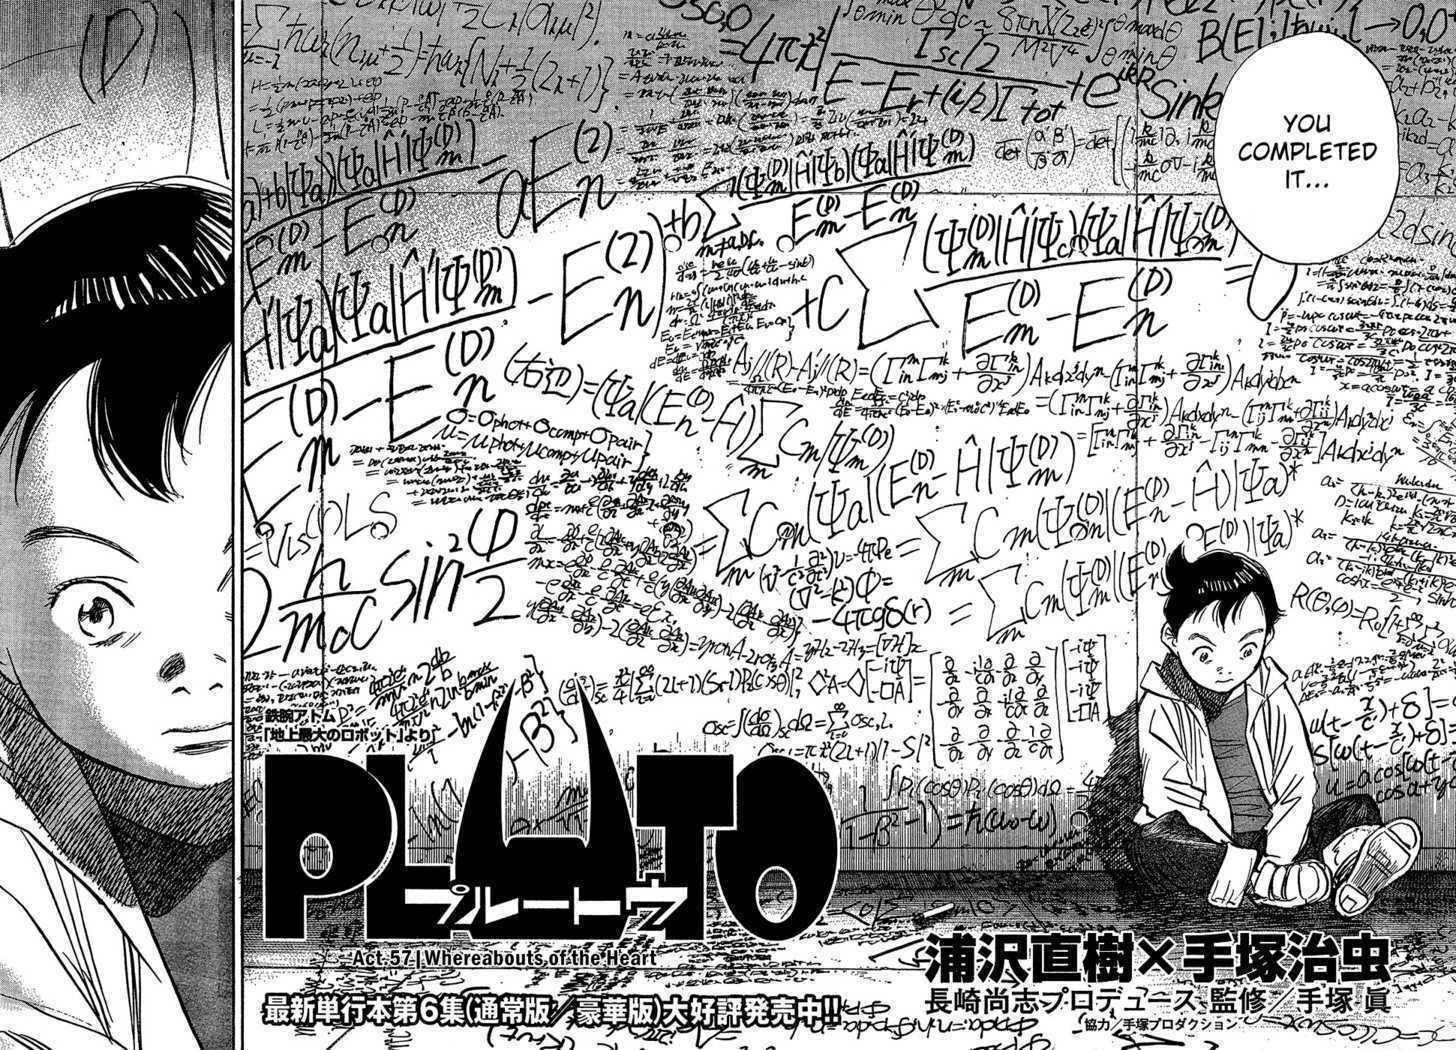 Pluto Vol.8 Chapter 57 : Whereabouts Of The Heart page 3 - Mangakakalot